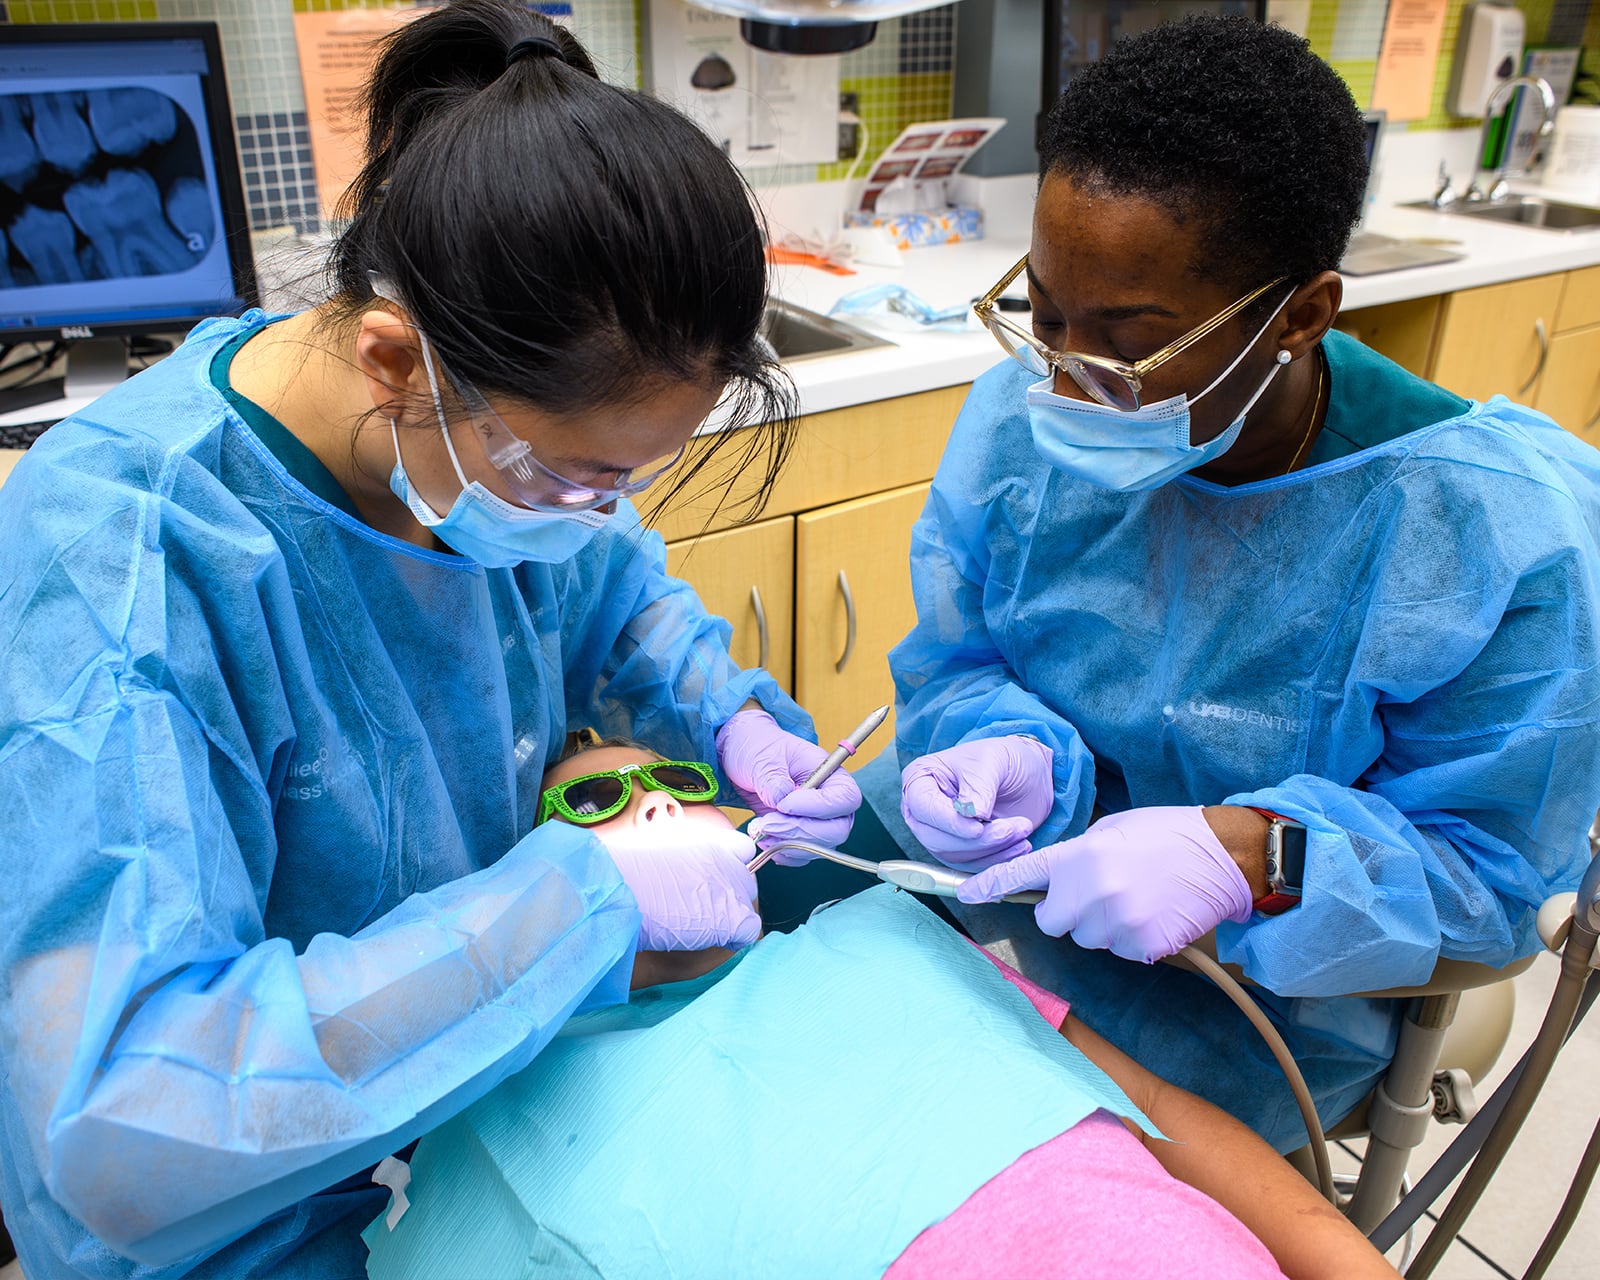 Two dentists examining a young girl's mouth.